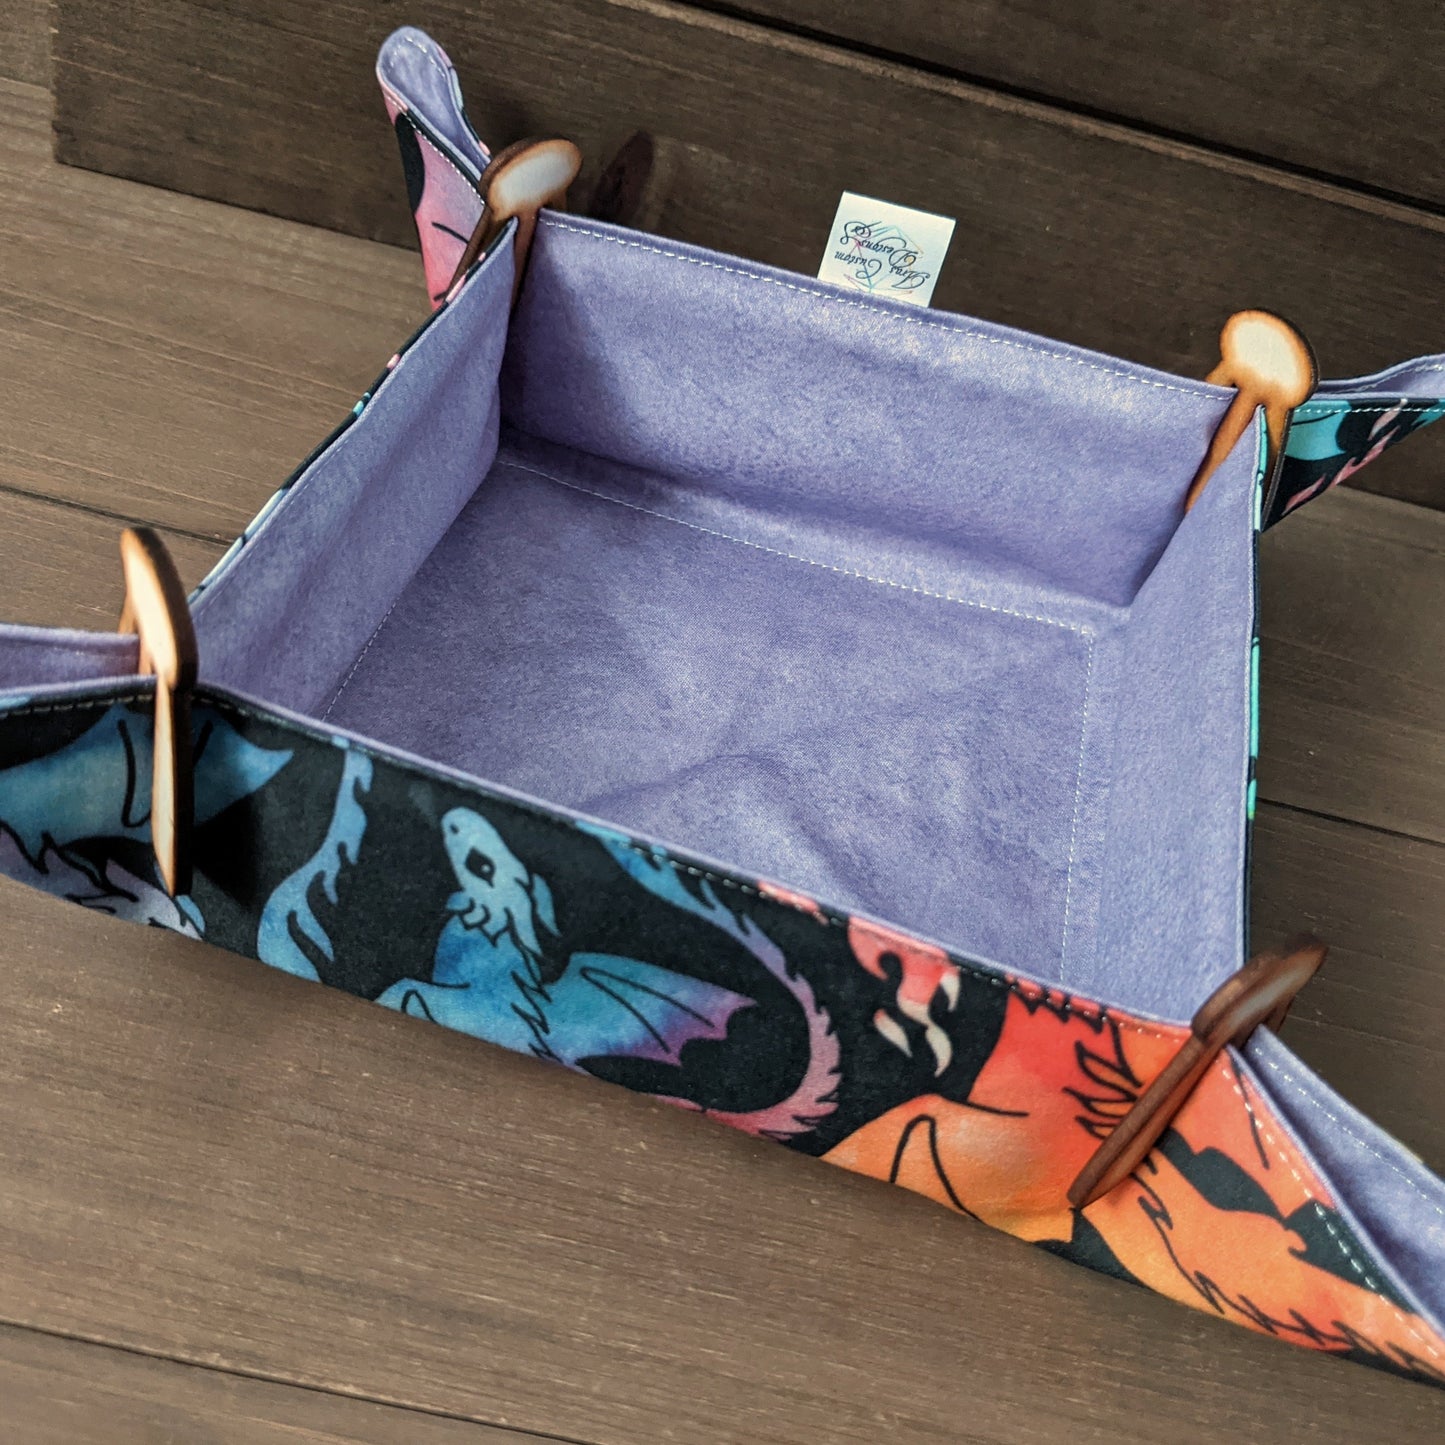 A dice tray with rainbow dragon fabric outside, purple fabric inside, and wooden clips in the corners sits on a wood surface.